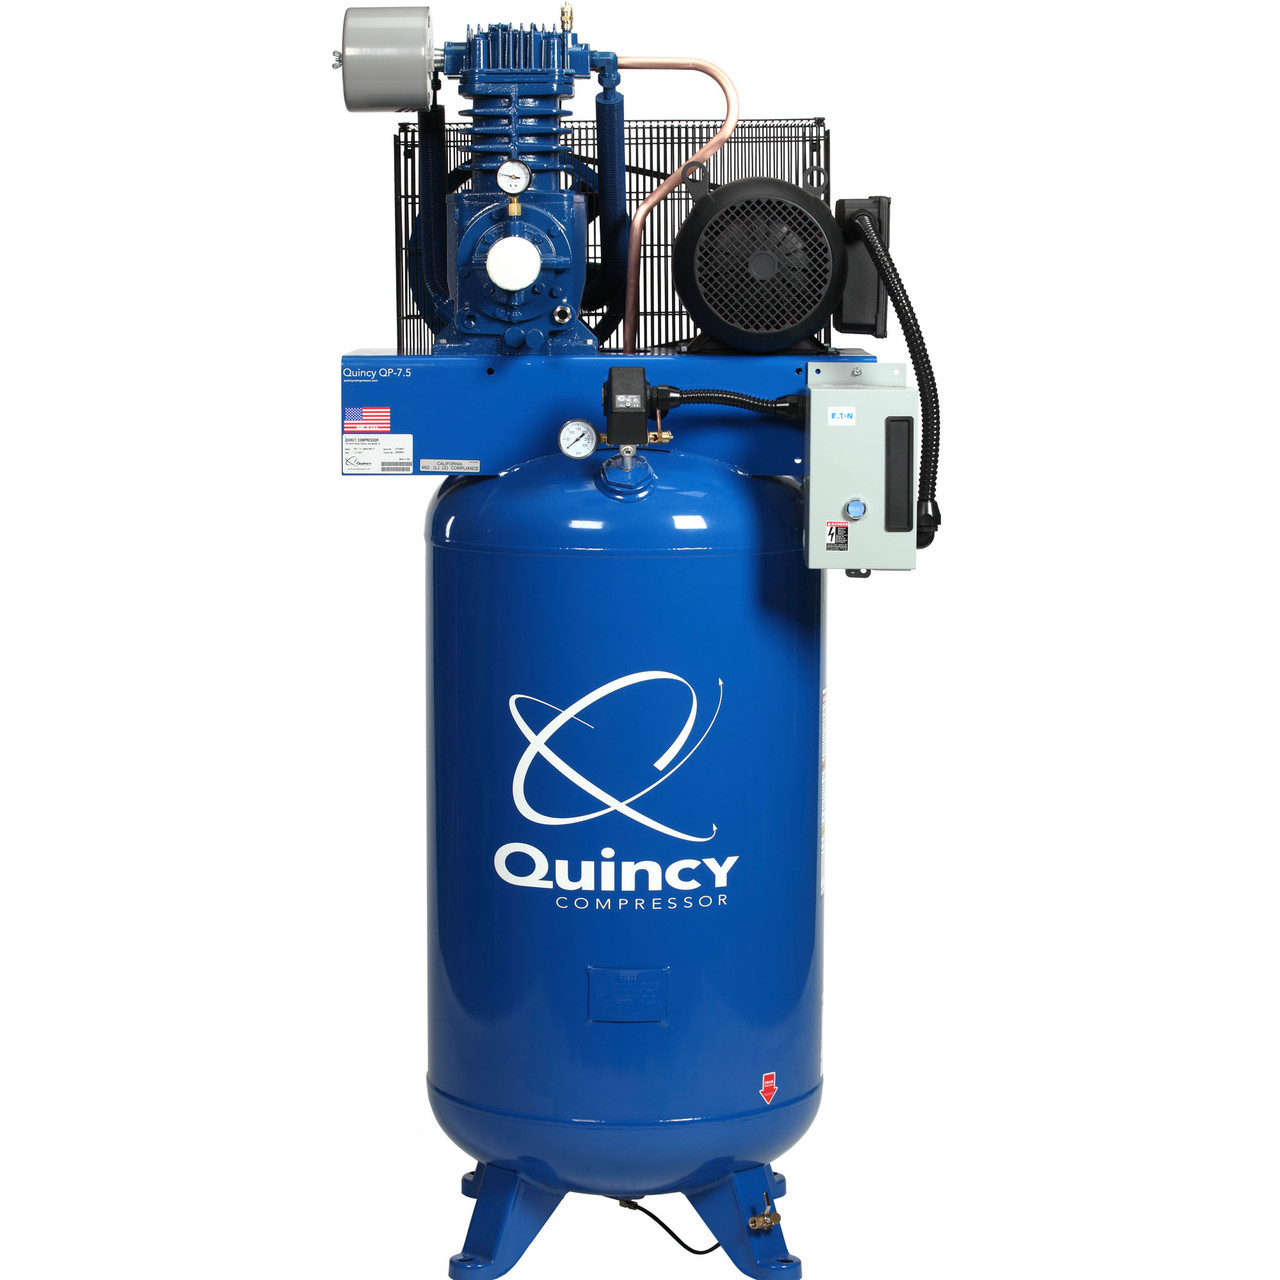 Quincy QP 353CS80VCB46 5 HP PRO, 460 Volt Three Phase, Two Stage, 80 Gallon Vertical Air Compressor